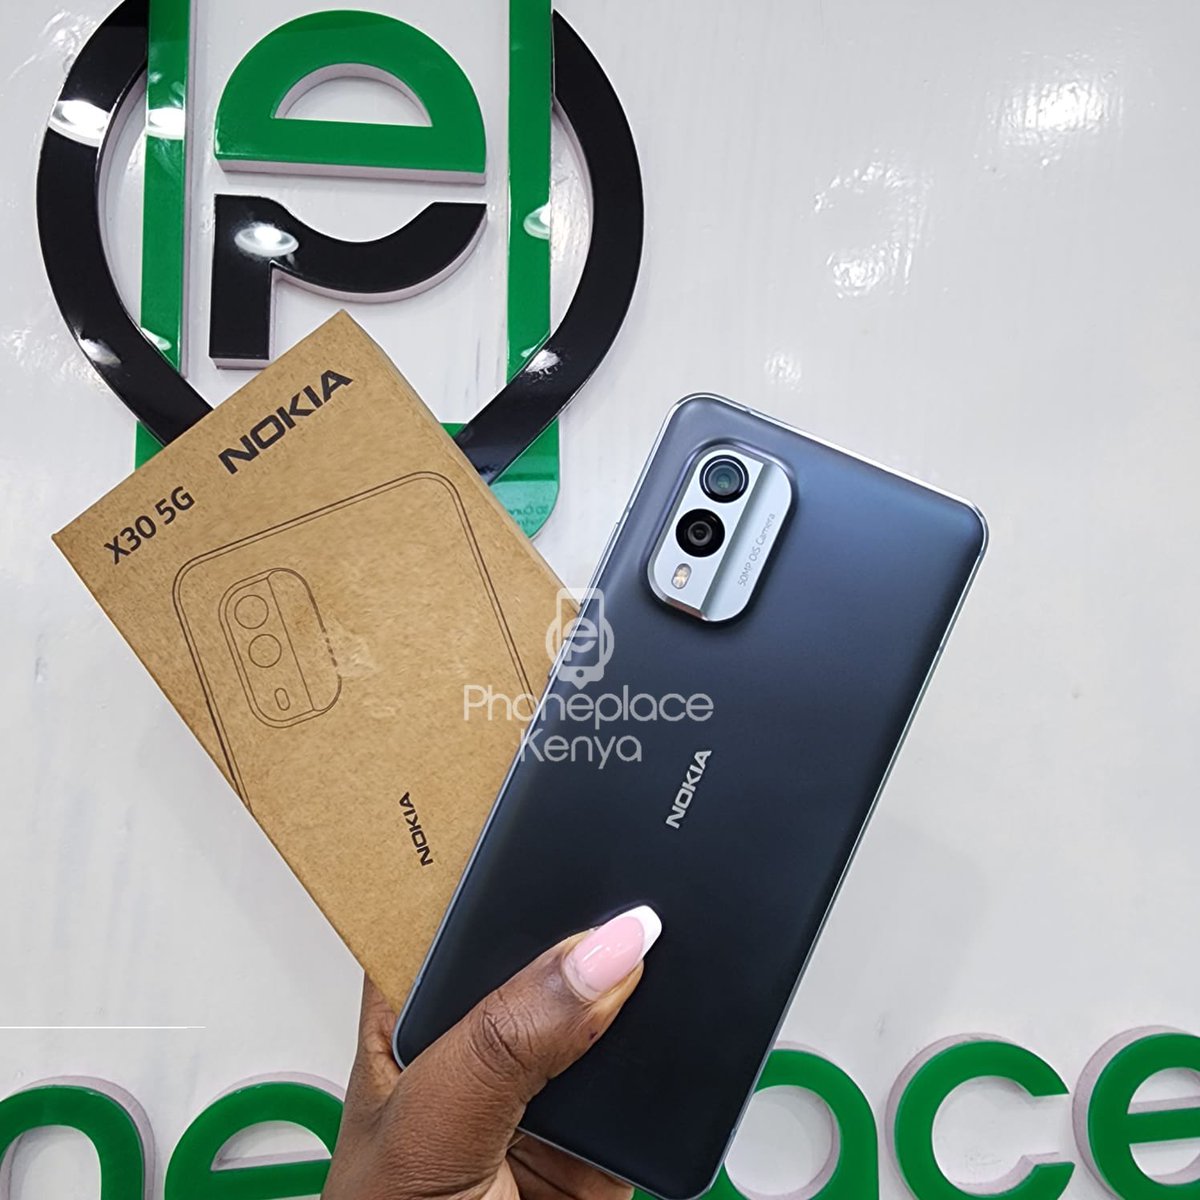 Nokia X30
✅Snapdragon 695, Octa Core, 2.2 GHz Processor
✅8 GB RAM, 256 GB inbuilt
✅4200 mAh Battery with 33W Fast Charging
✅6.43 inches, 1080 x 2400 px, 90 Hz Display with Punch Hole
✅50 MP + 13 MP Dual Rear & 16 MP Front Camera

📞0726-526-375
Delivery Countrywide